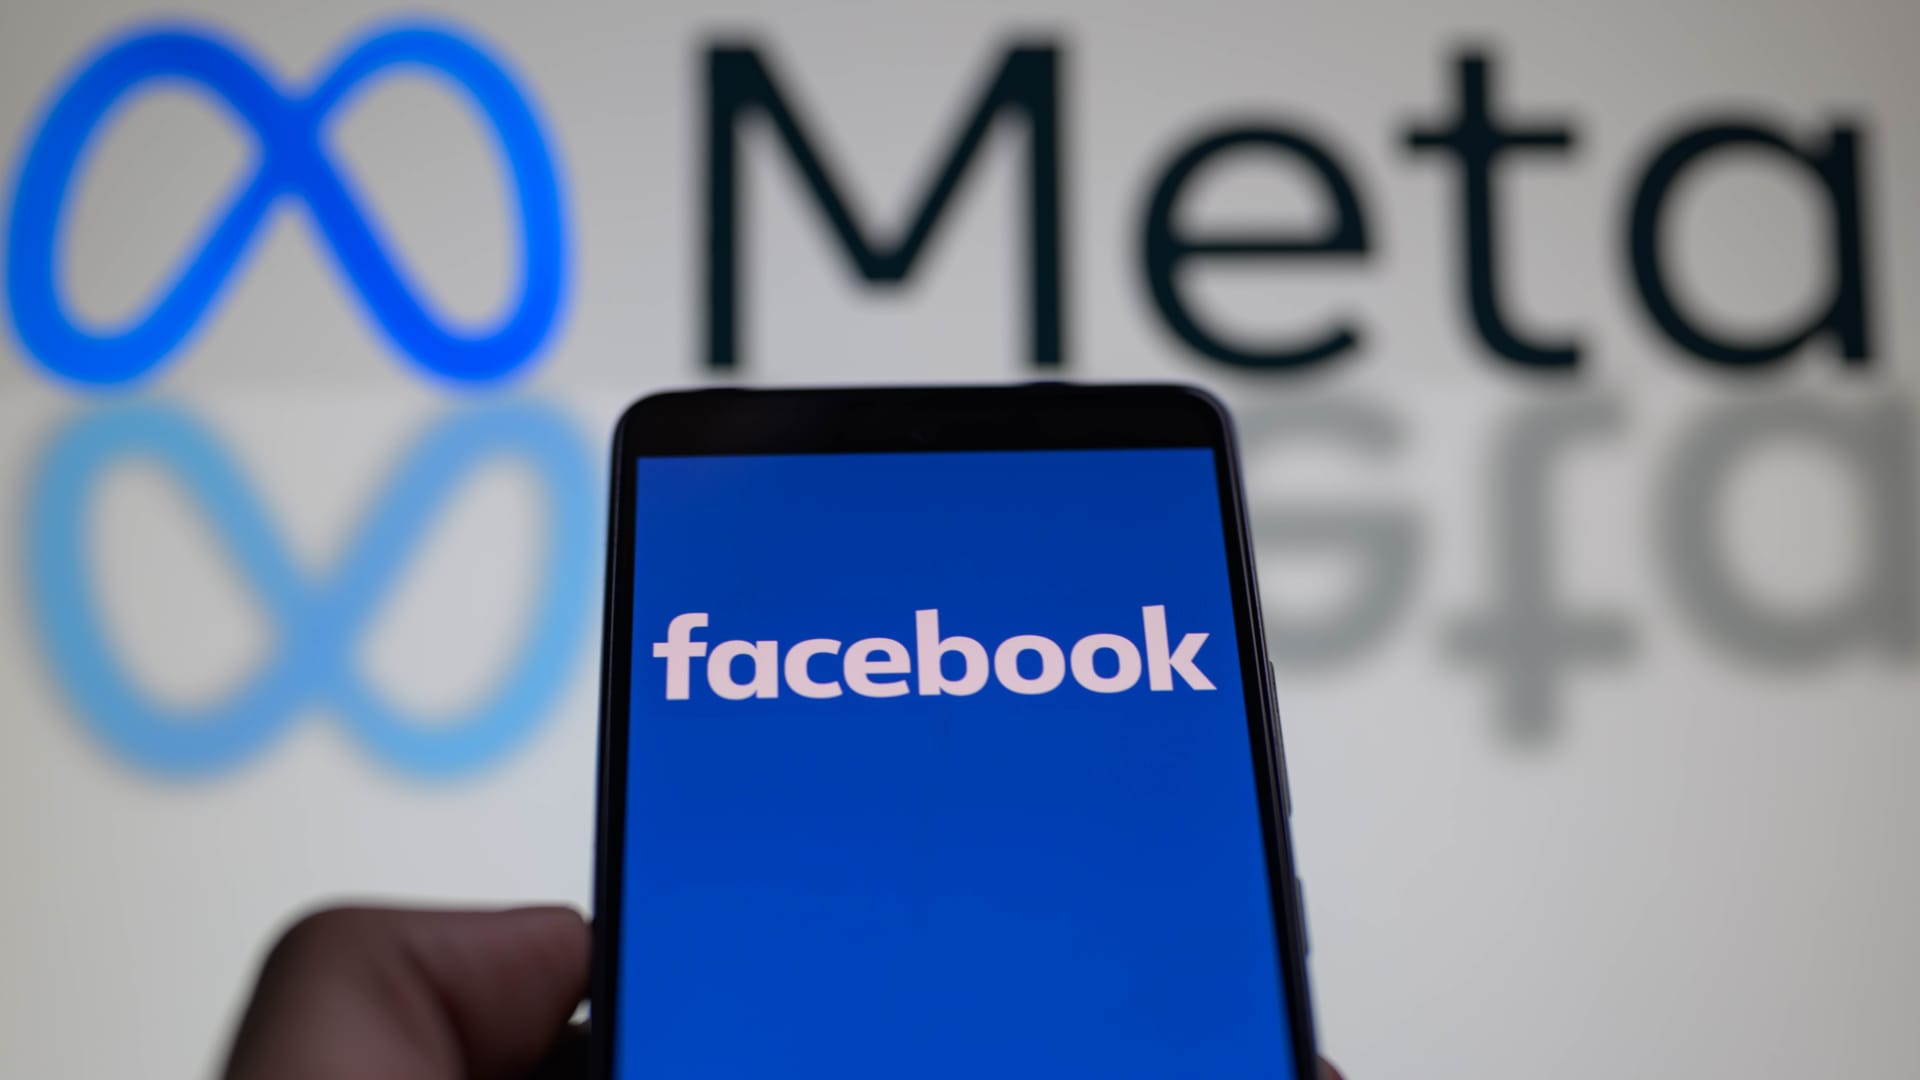 Meta slapped with child safety probe under sweeping EU tech law [Video]